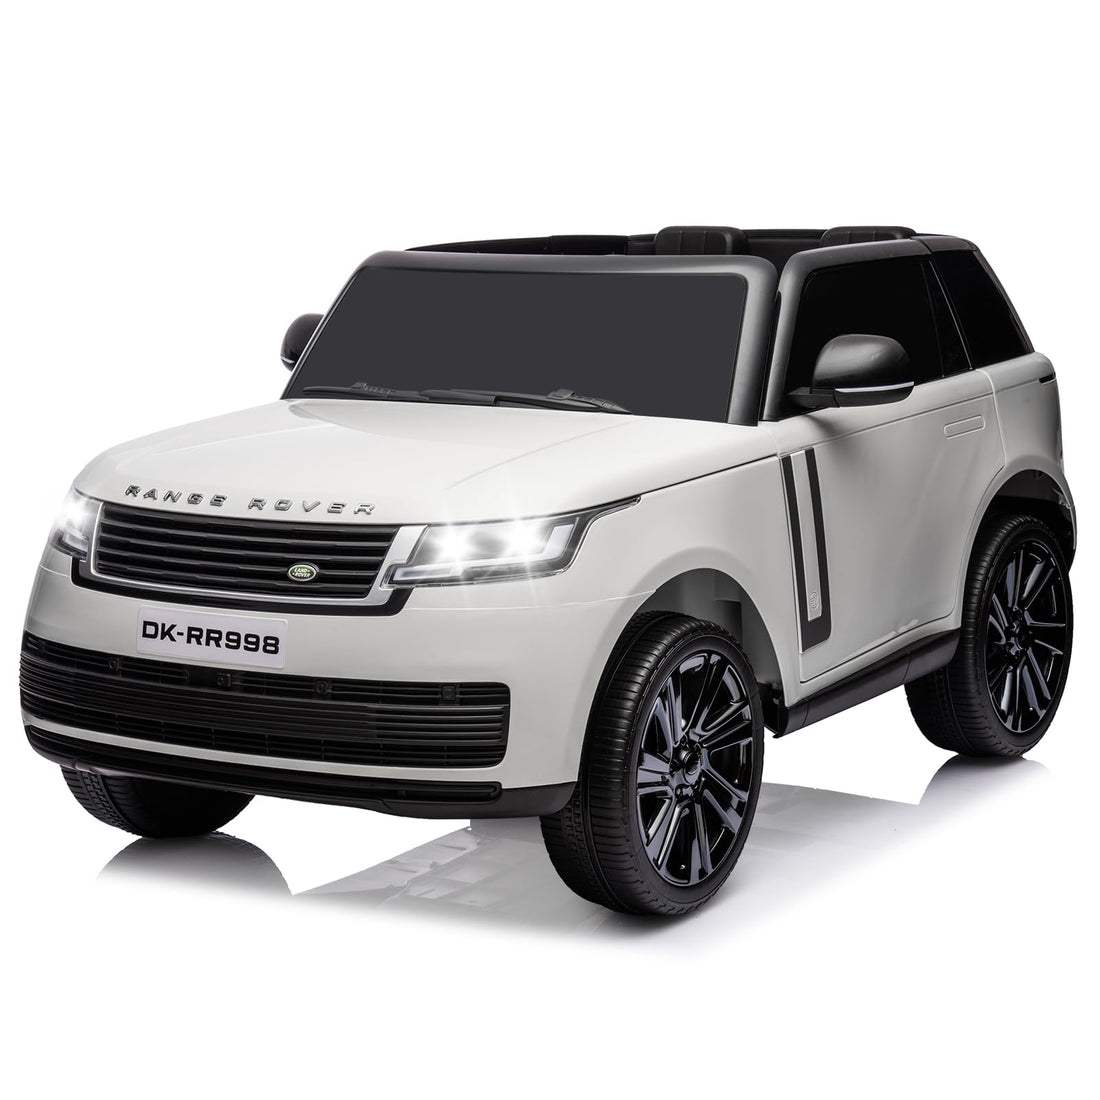 GARVEE 24V Land Rover Ride-On Car: 2-Seater, MP3, 3 Speeds, Remote Control, LED, 4-Wheel Suspension, 52"x32"x24" - White